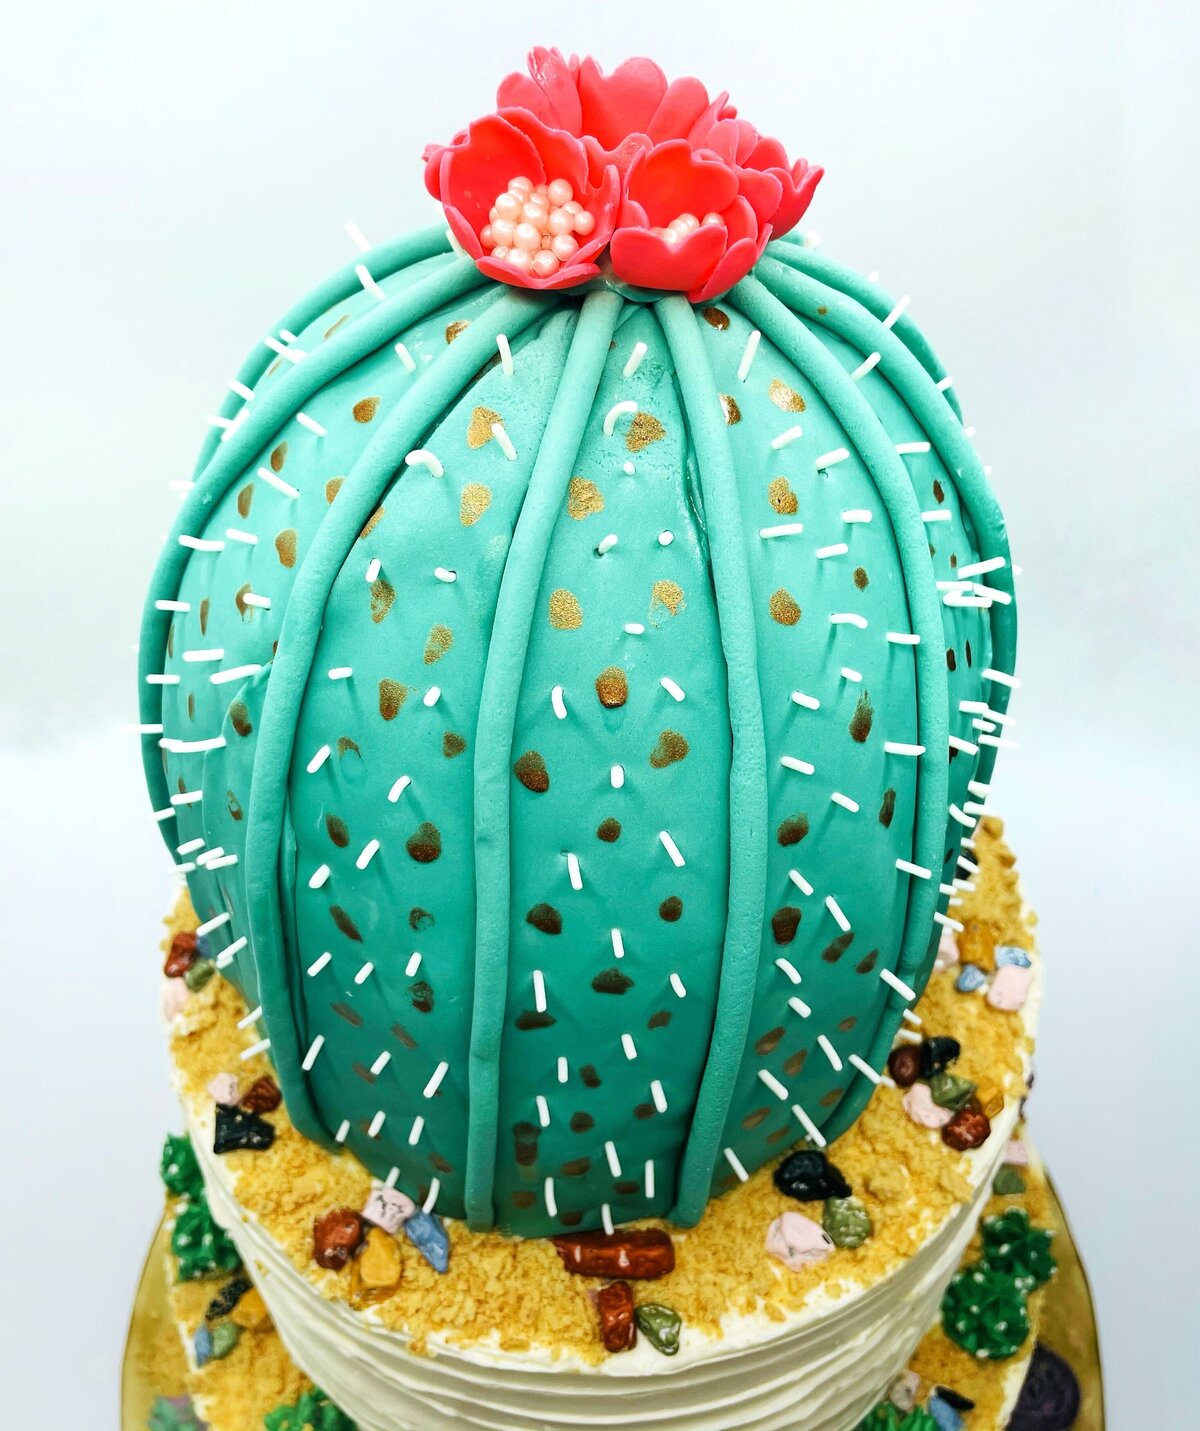 Carved barrel cactus cake with red sugar flower blooms